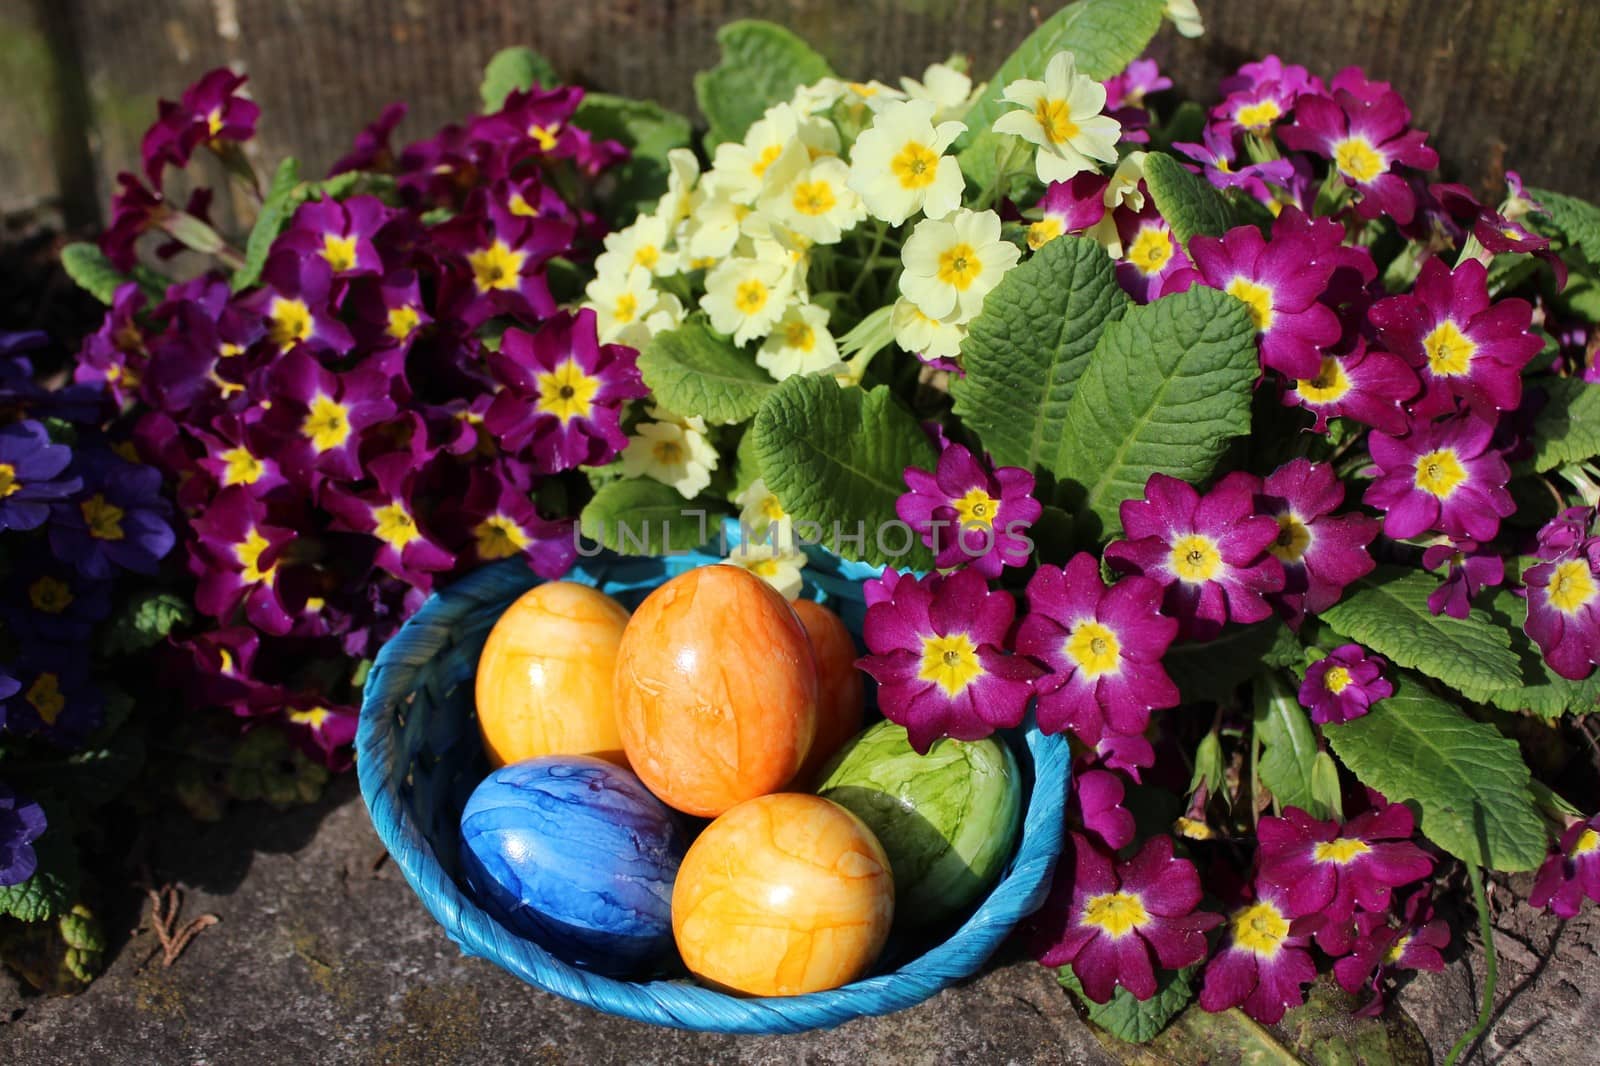 The picture shows eastereggs in primroses.